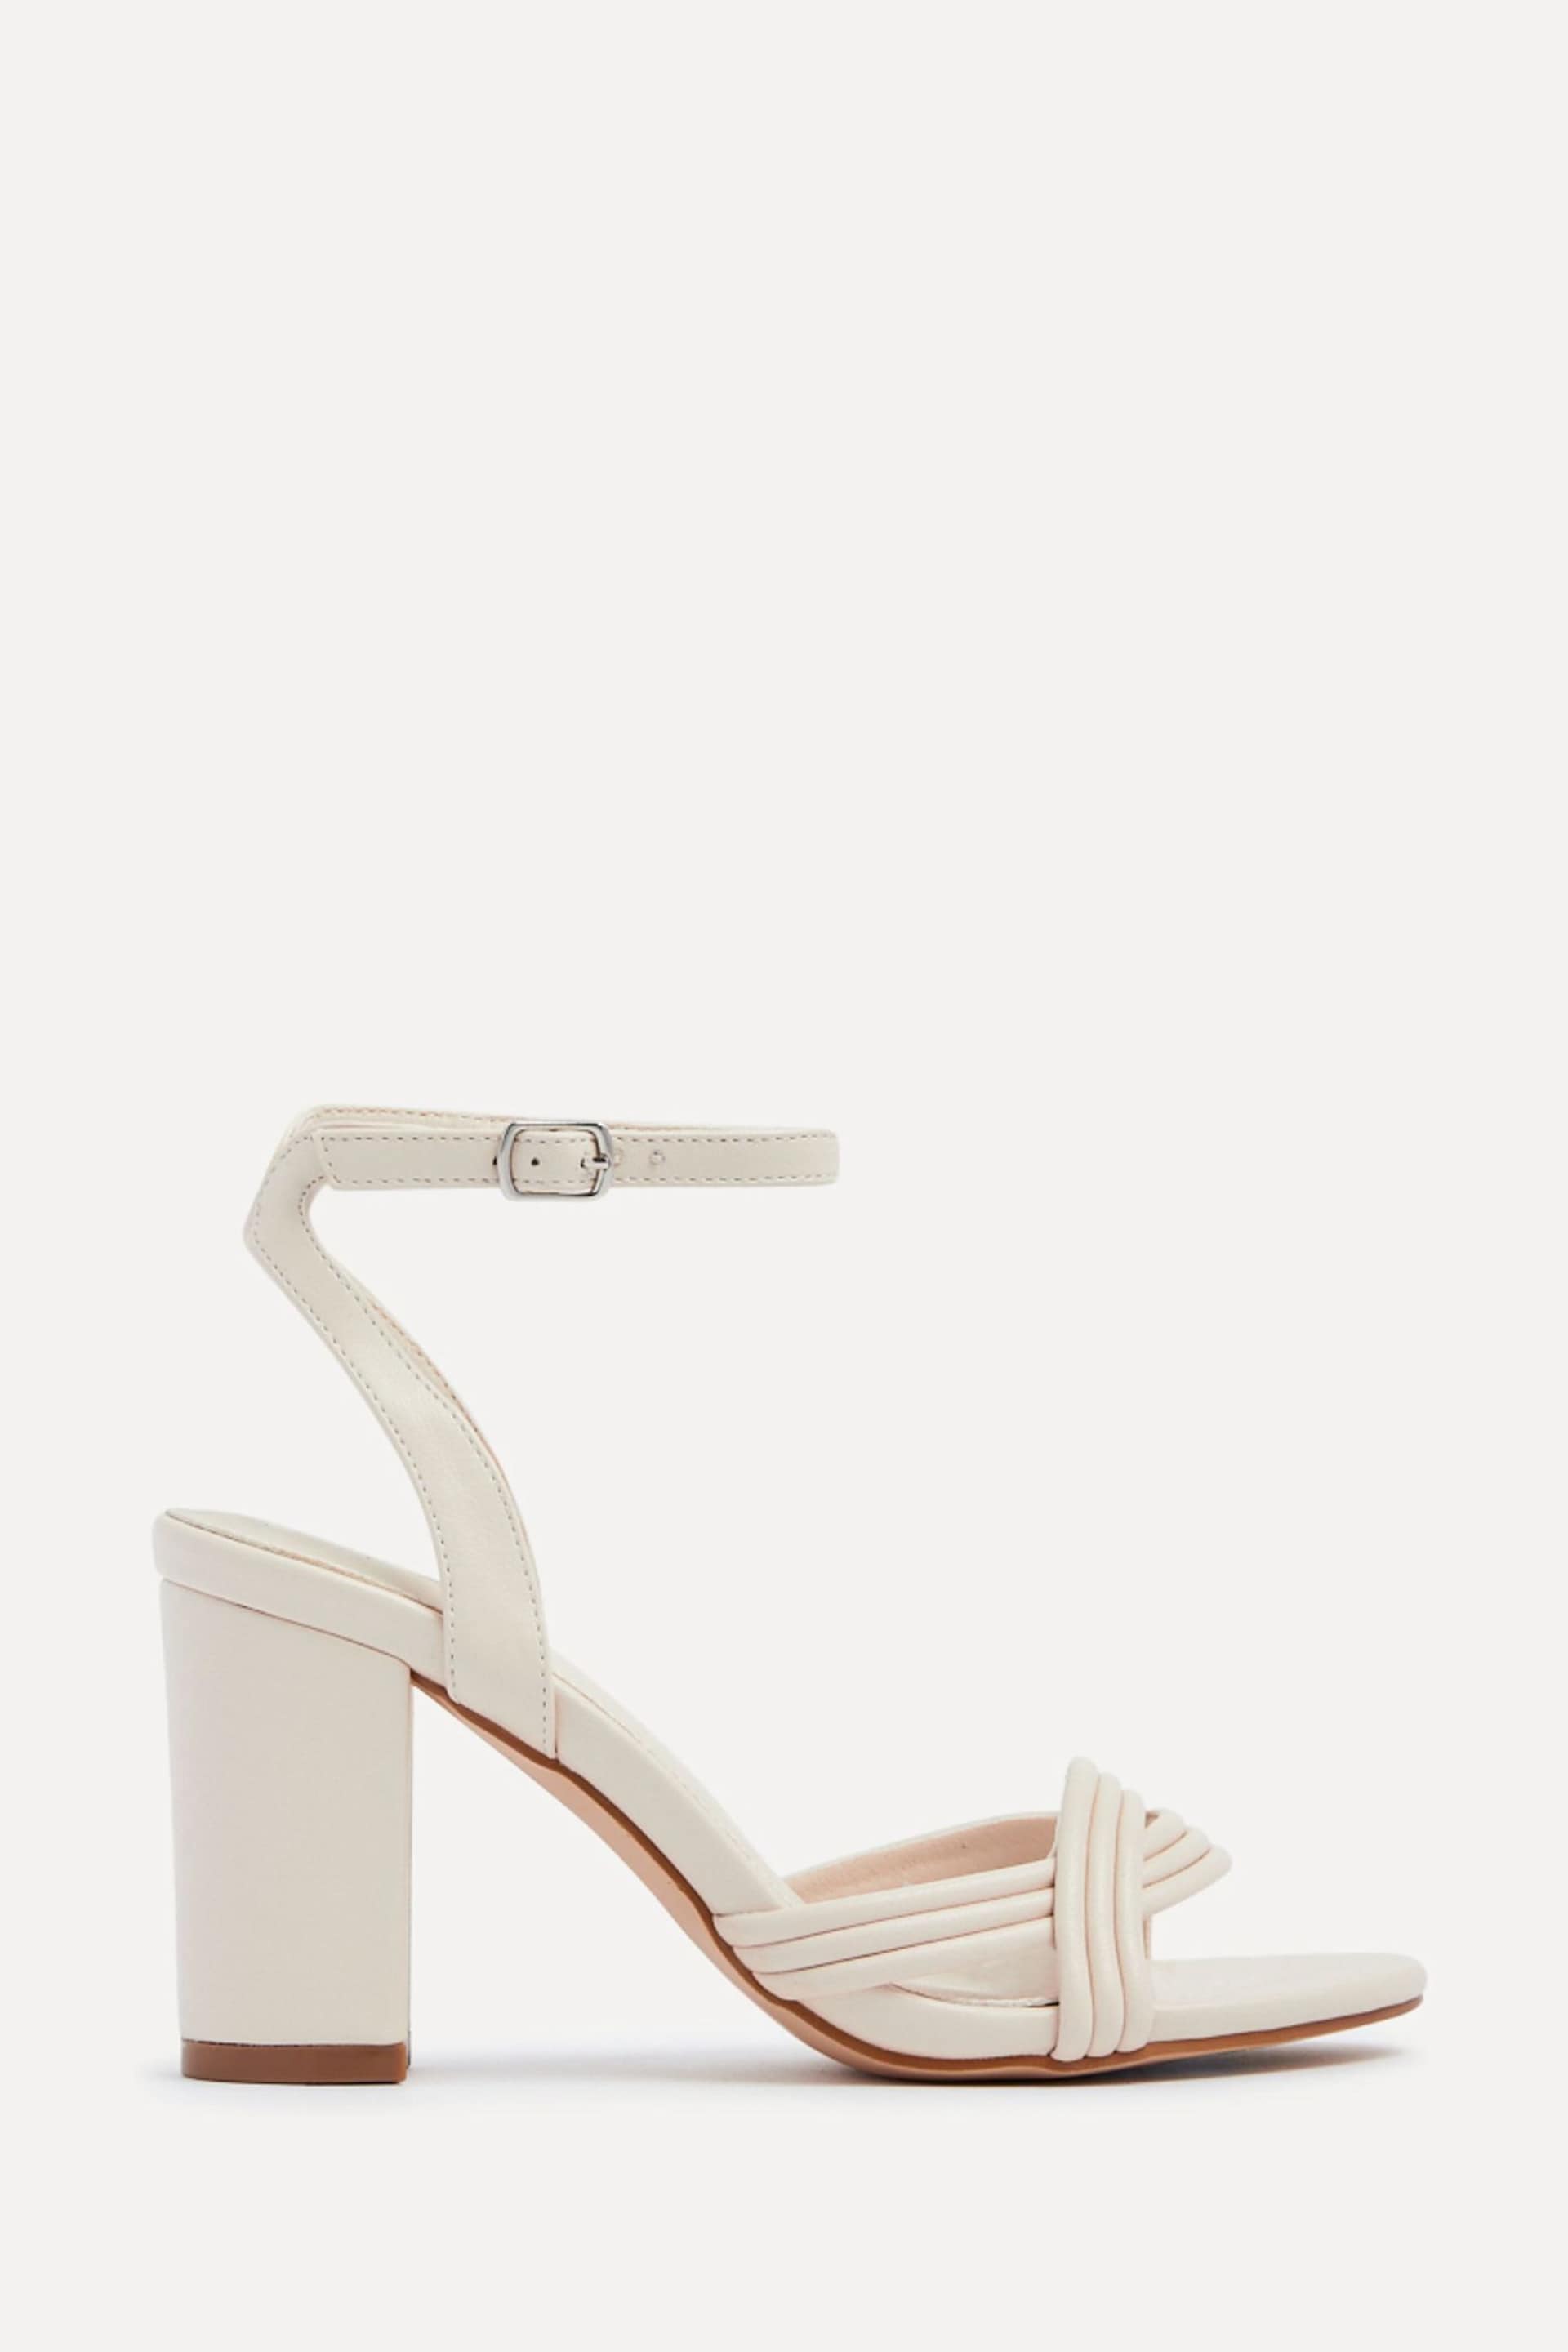 Linzi Nude Regina Block Heeled Sandals With Intertwined Front Straps - Image 1 of 1